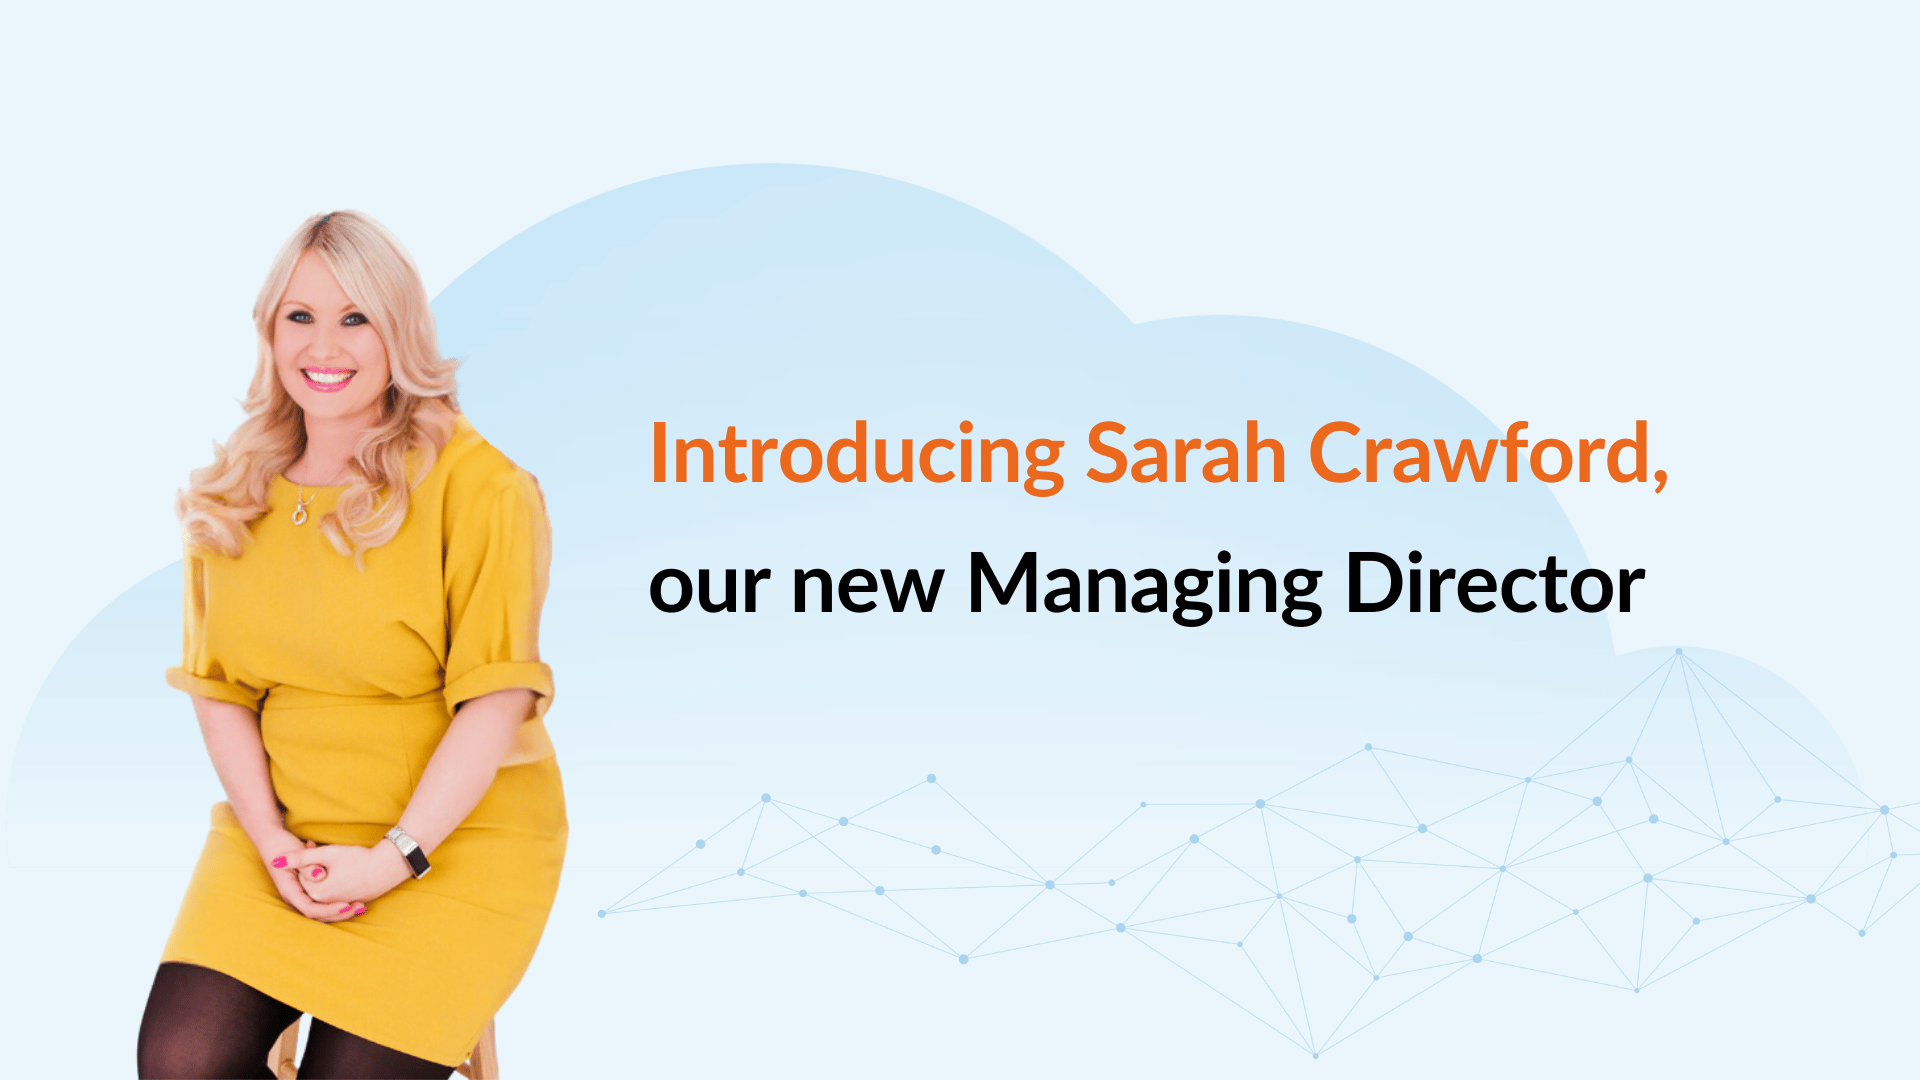 Sarah Crawford, new MD, takes the helm at Chalkstring, driving innovation for specialist contractors.